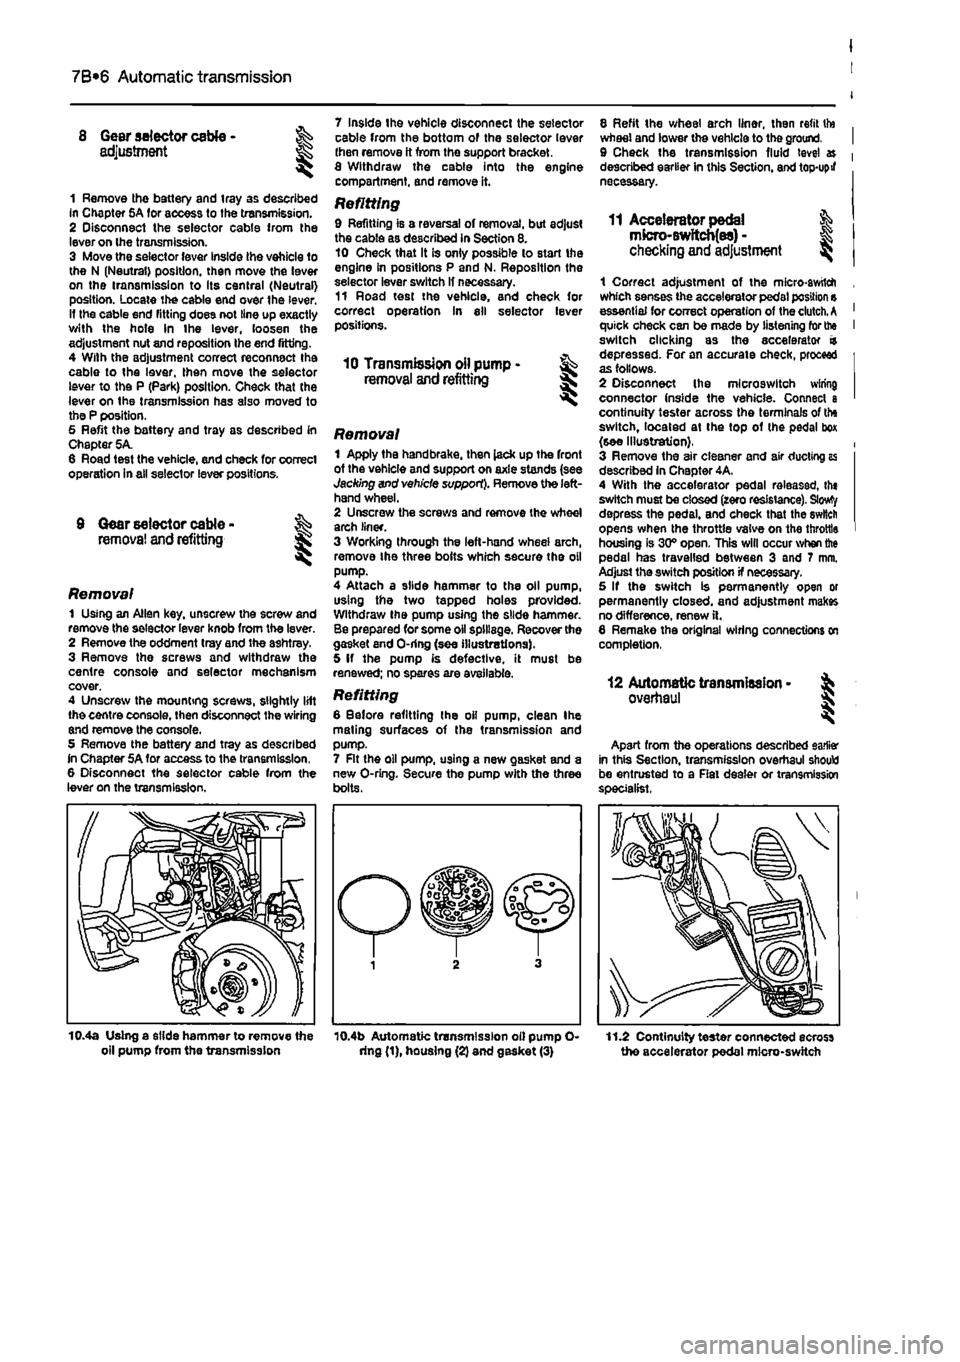 FIAT PUNTO 1995 176 / 1.G Owners Guide 
7B*6 Automatic transmission 
Gear selector cable -adjustment 
1 Remove the battery and tray as described In Chapter 5A for access to the transmission. 2 Disconnect the selector cable from the lever o